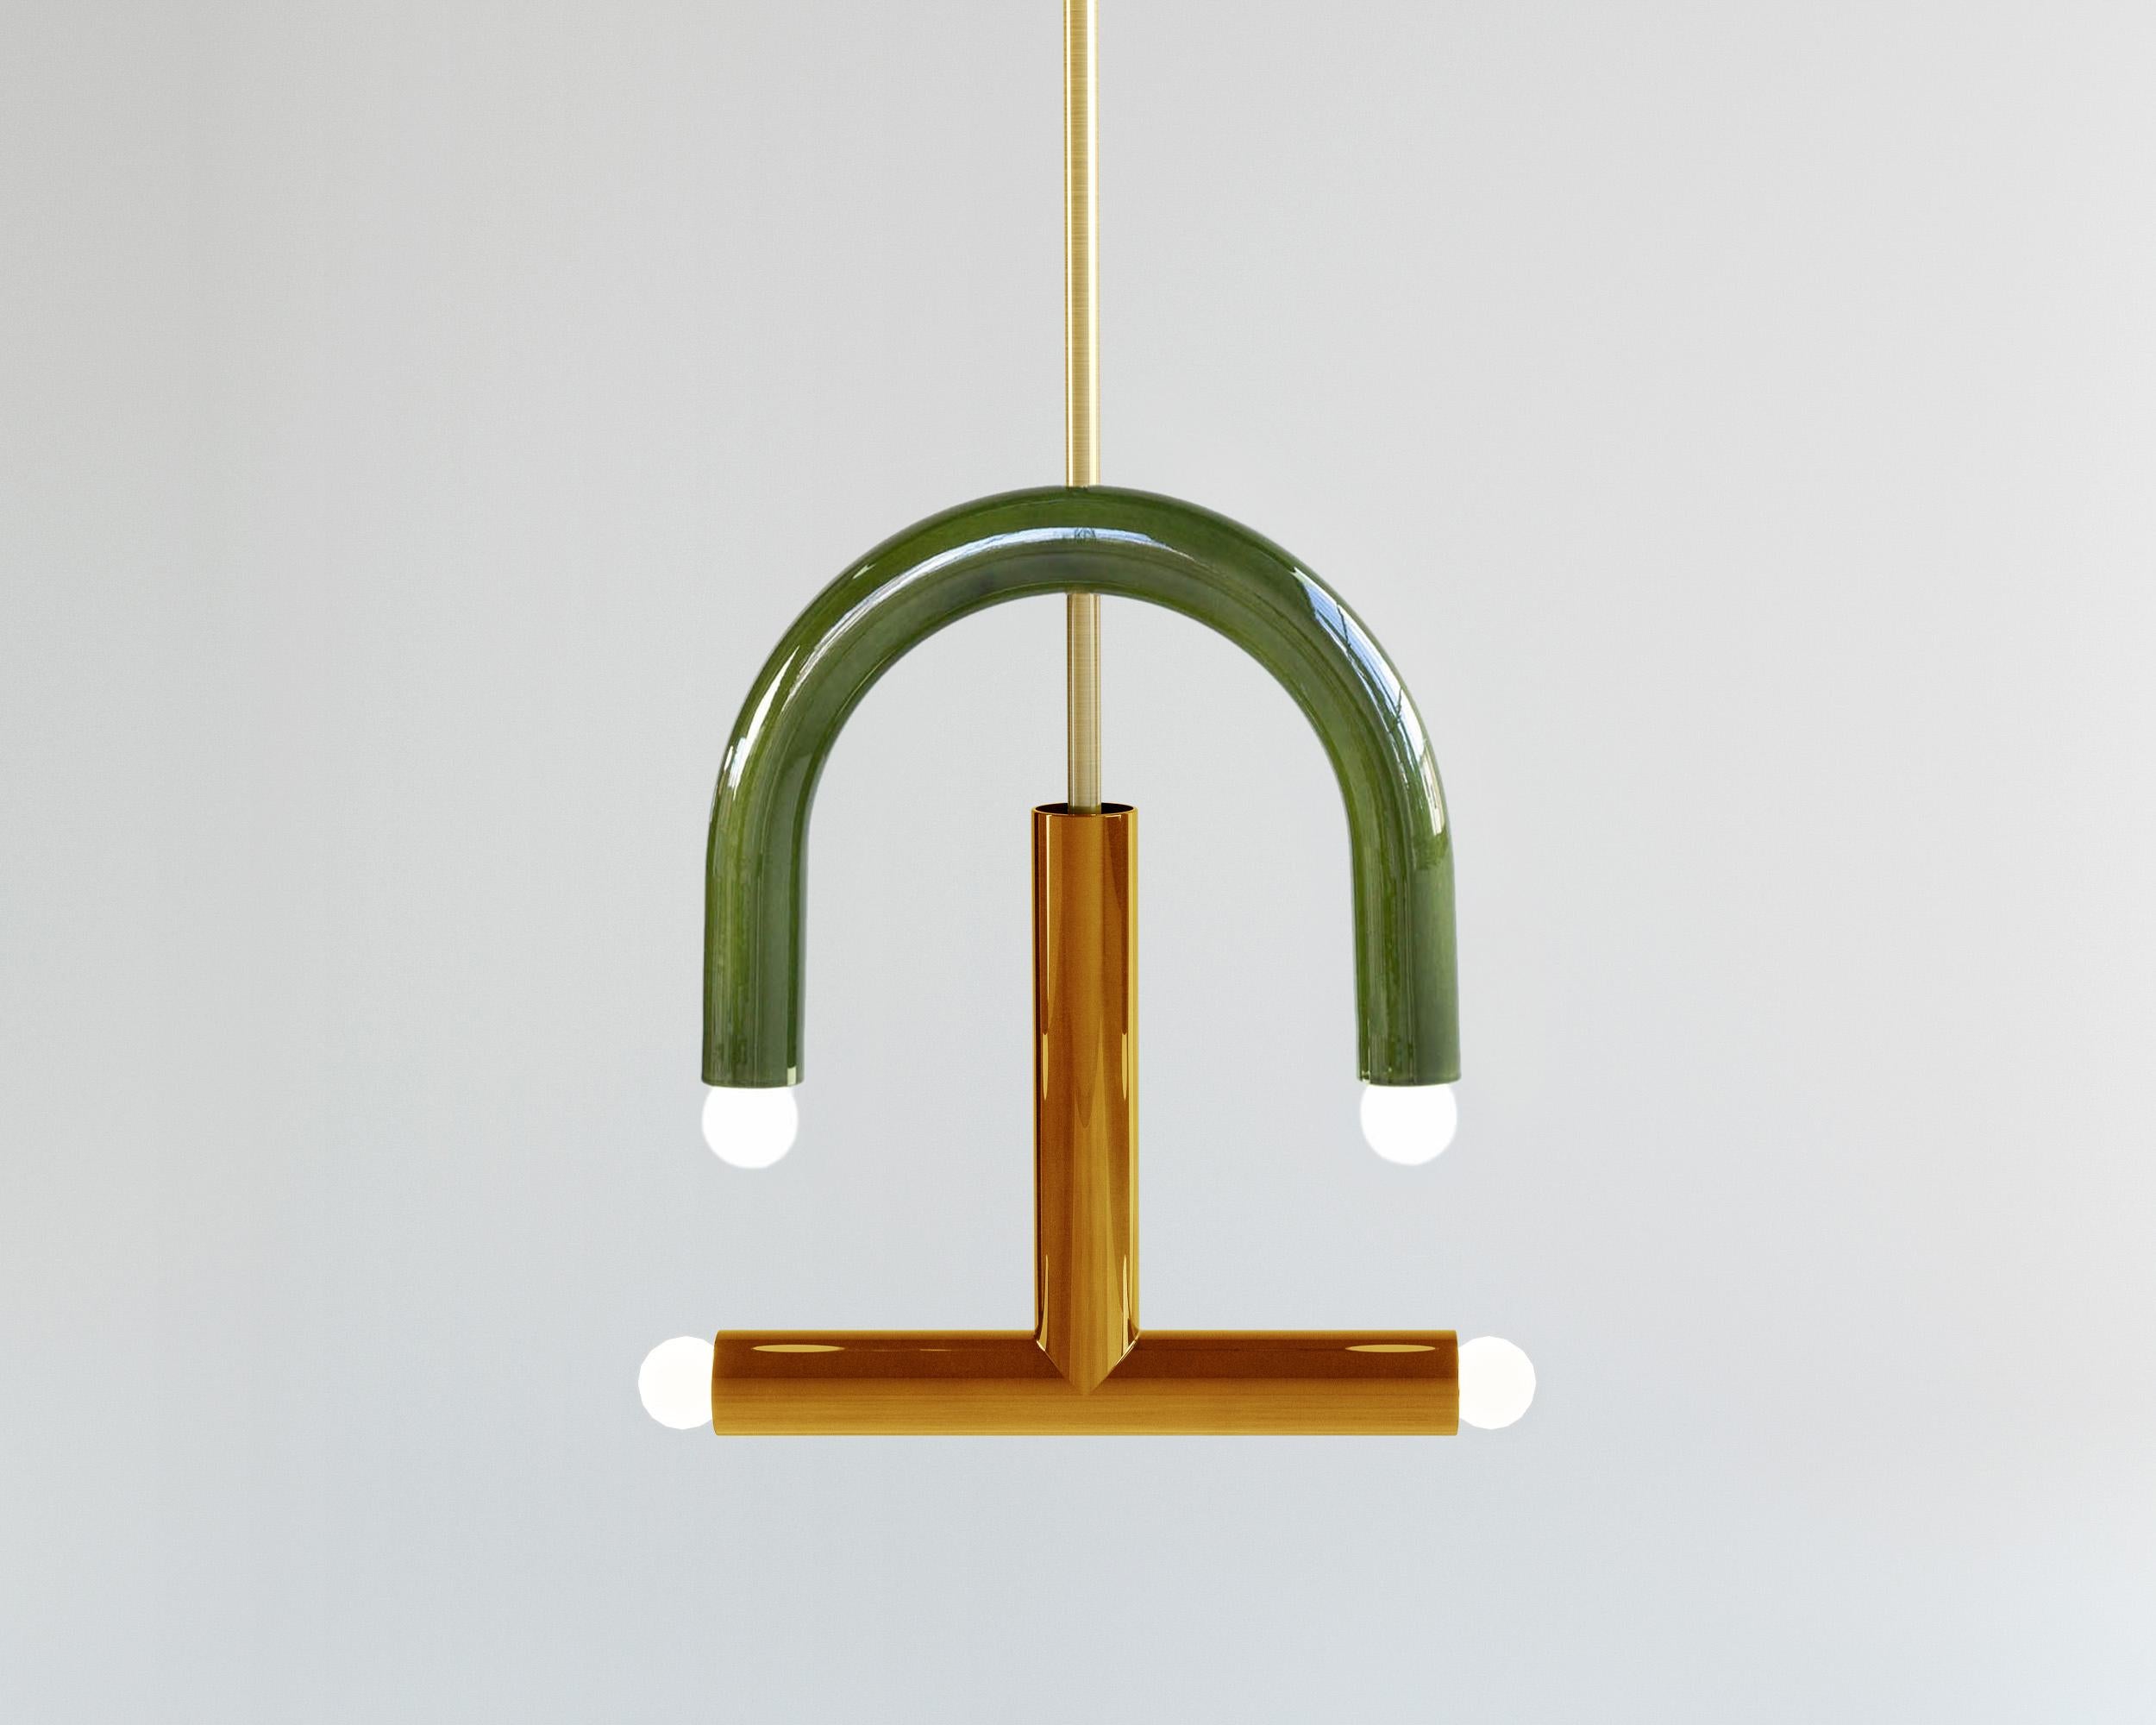 TRN C3 Pendant lamp / ceiling lamp / chandelier 
Designer: Pani Jurek

Dimensions: H 45 x 35 x 5 cm

Bulb (not included): E27/E26, compatible with US electric system

Materials: Hand glazed ceramic and brass
Rod: brass, length made to order -